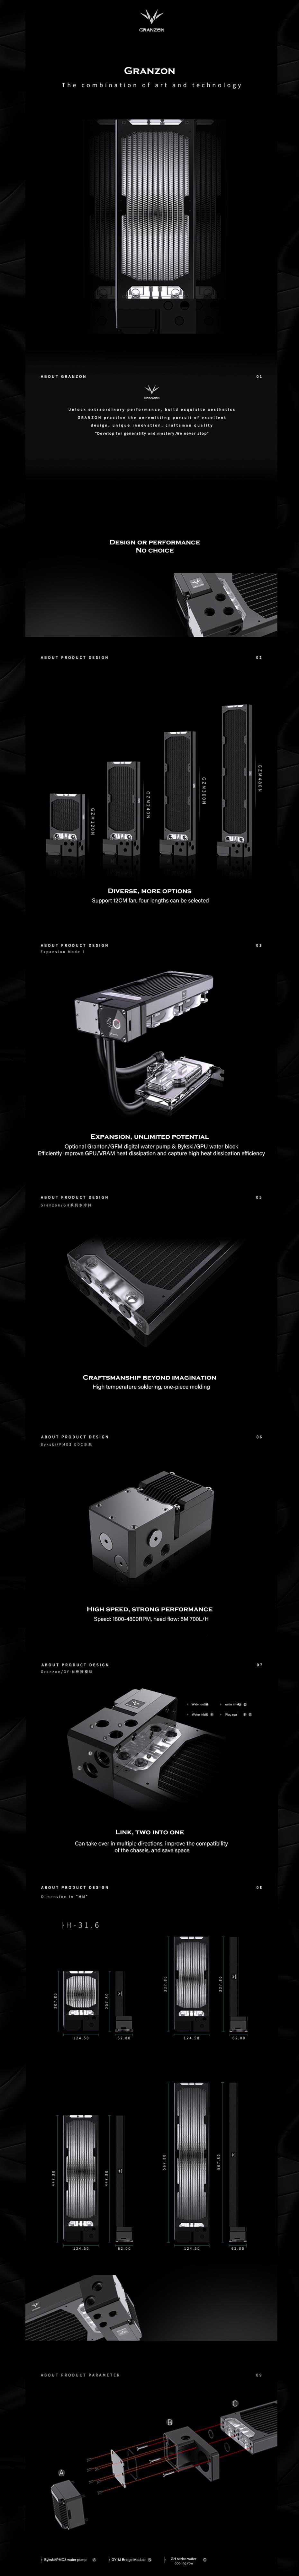 A large marketing image providing additional information about the product Bykski Granzon 360mm Pump Radiator Combo - Additional alt info not provided